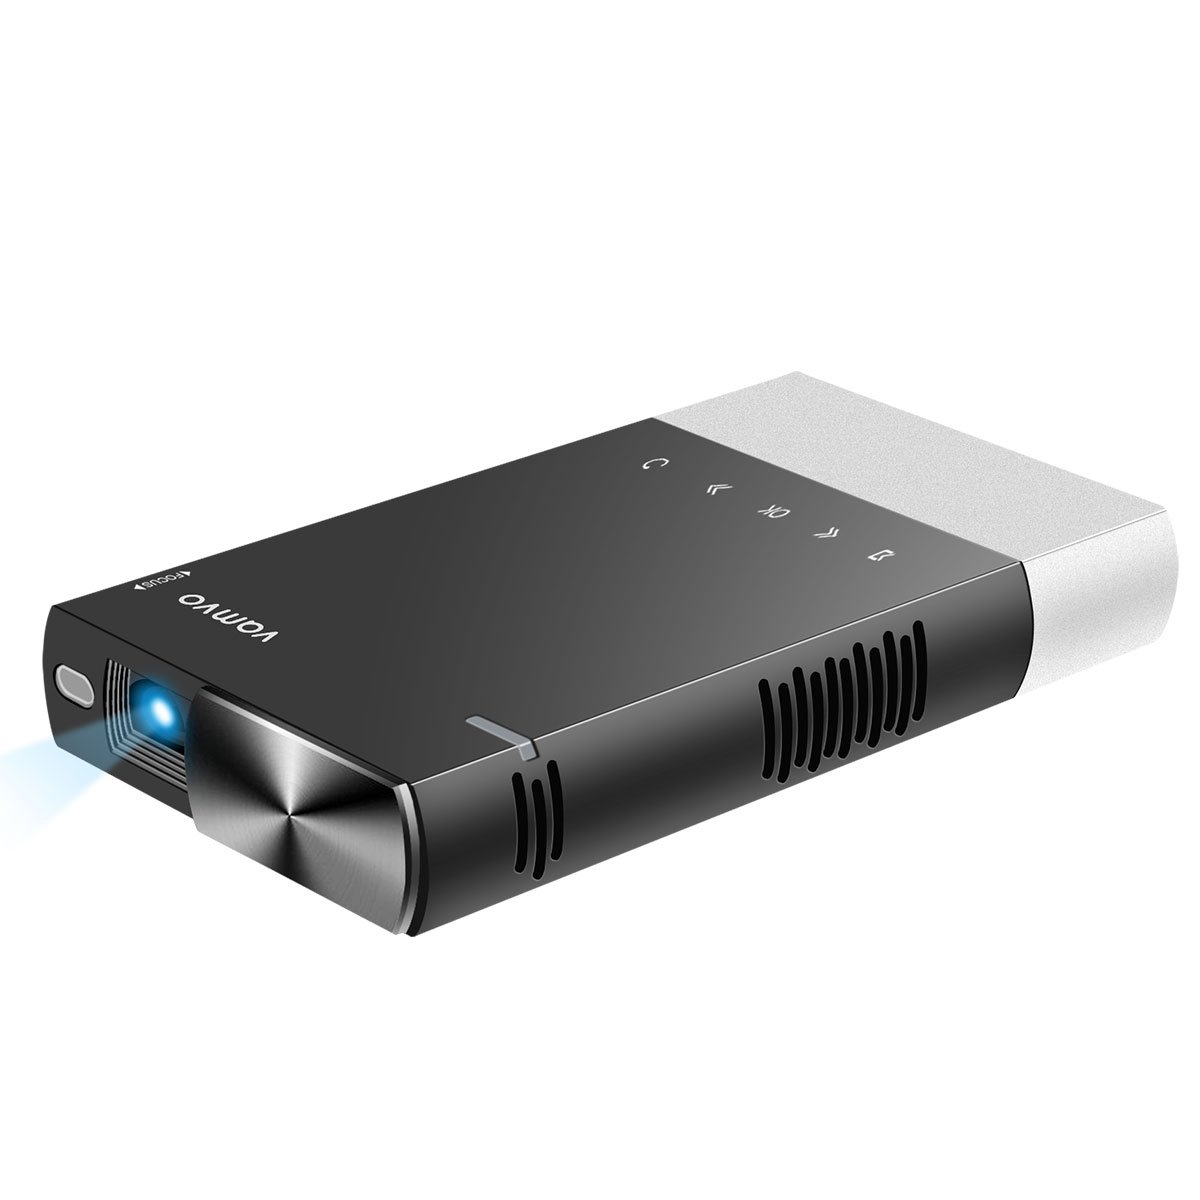 Mini Projector, Vamvo Ultra Mini Portable Projector 1080p Supported HD DLP LED Rechargeable Pico Projector with HDMI, USB, TF, and Micro SD Supports iPhone Android Laptop PC Projectors for Outdoor